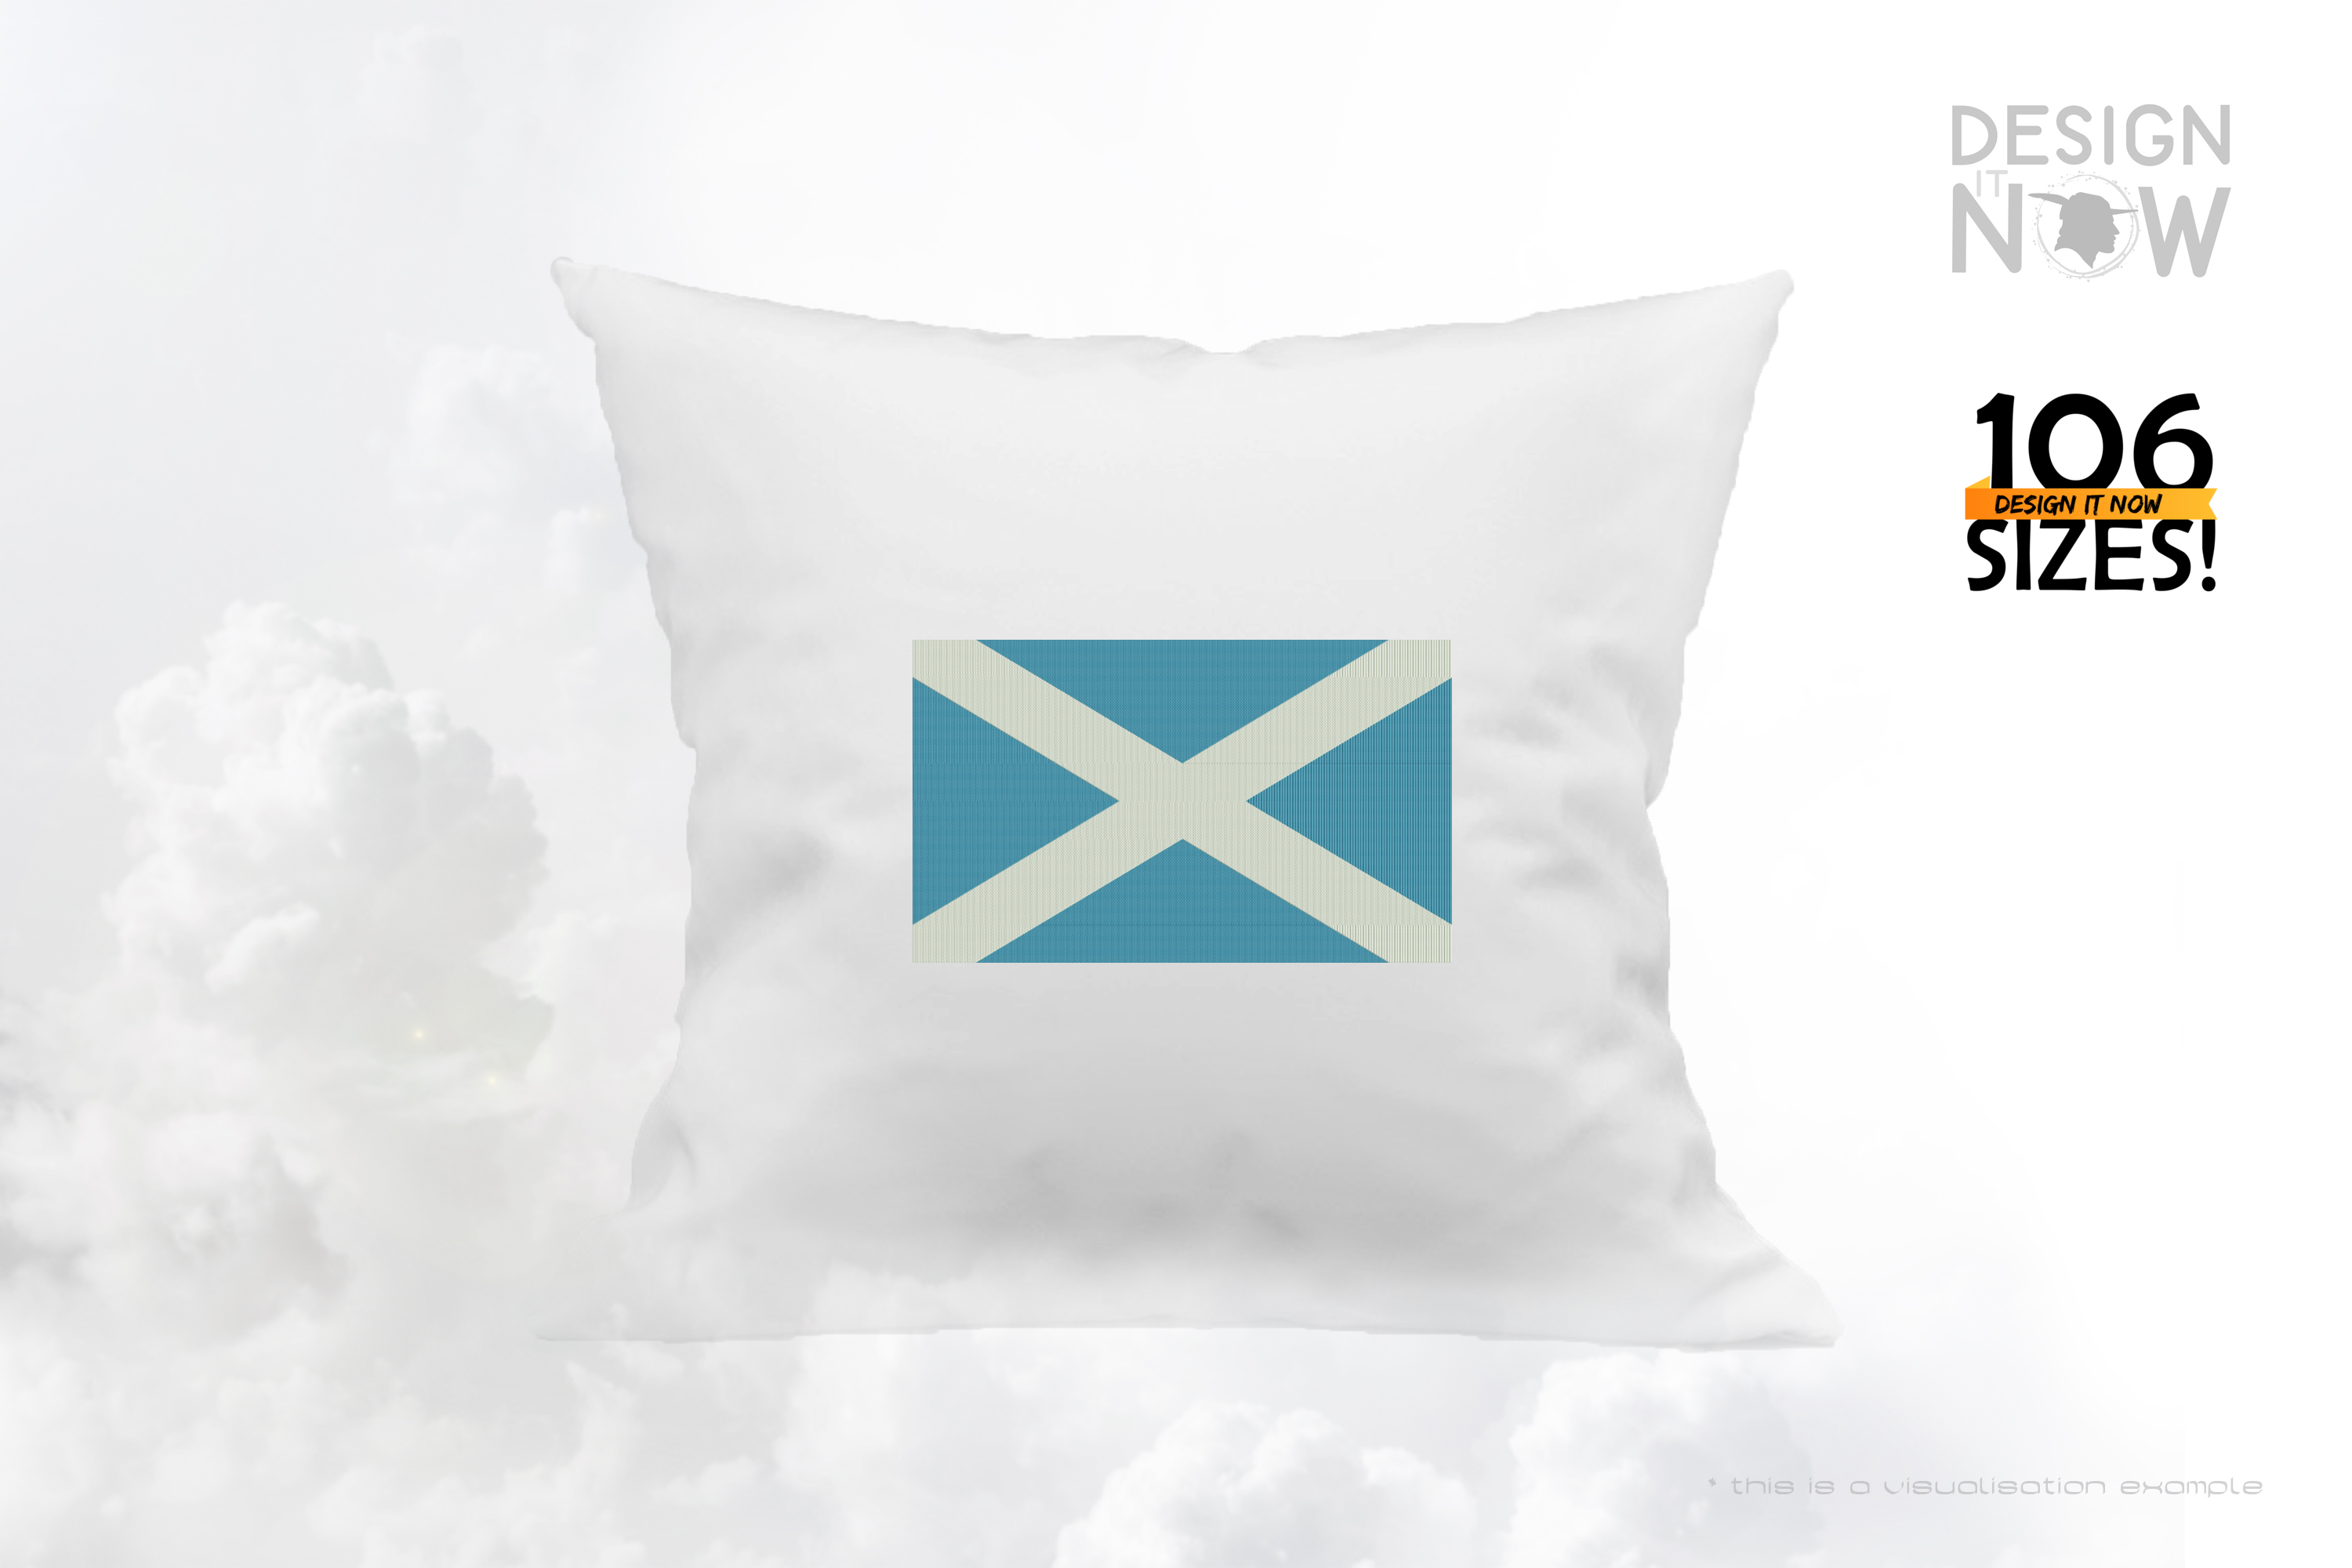 Scotland-Flag of Scotland-St Andrew's Cross-Saltire-United Kingdom of Great Britain and Northern Ireland